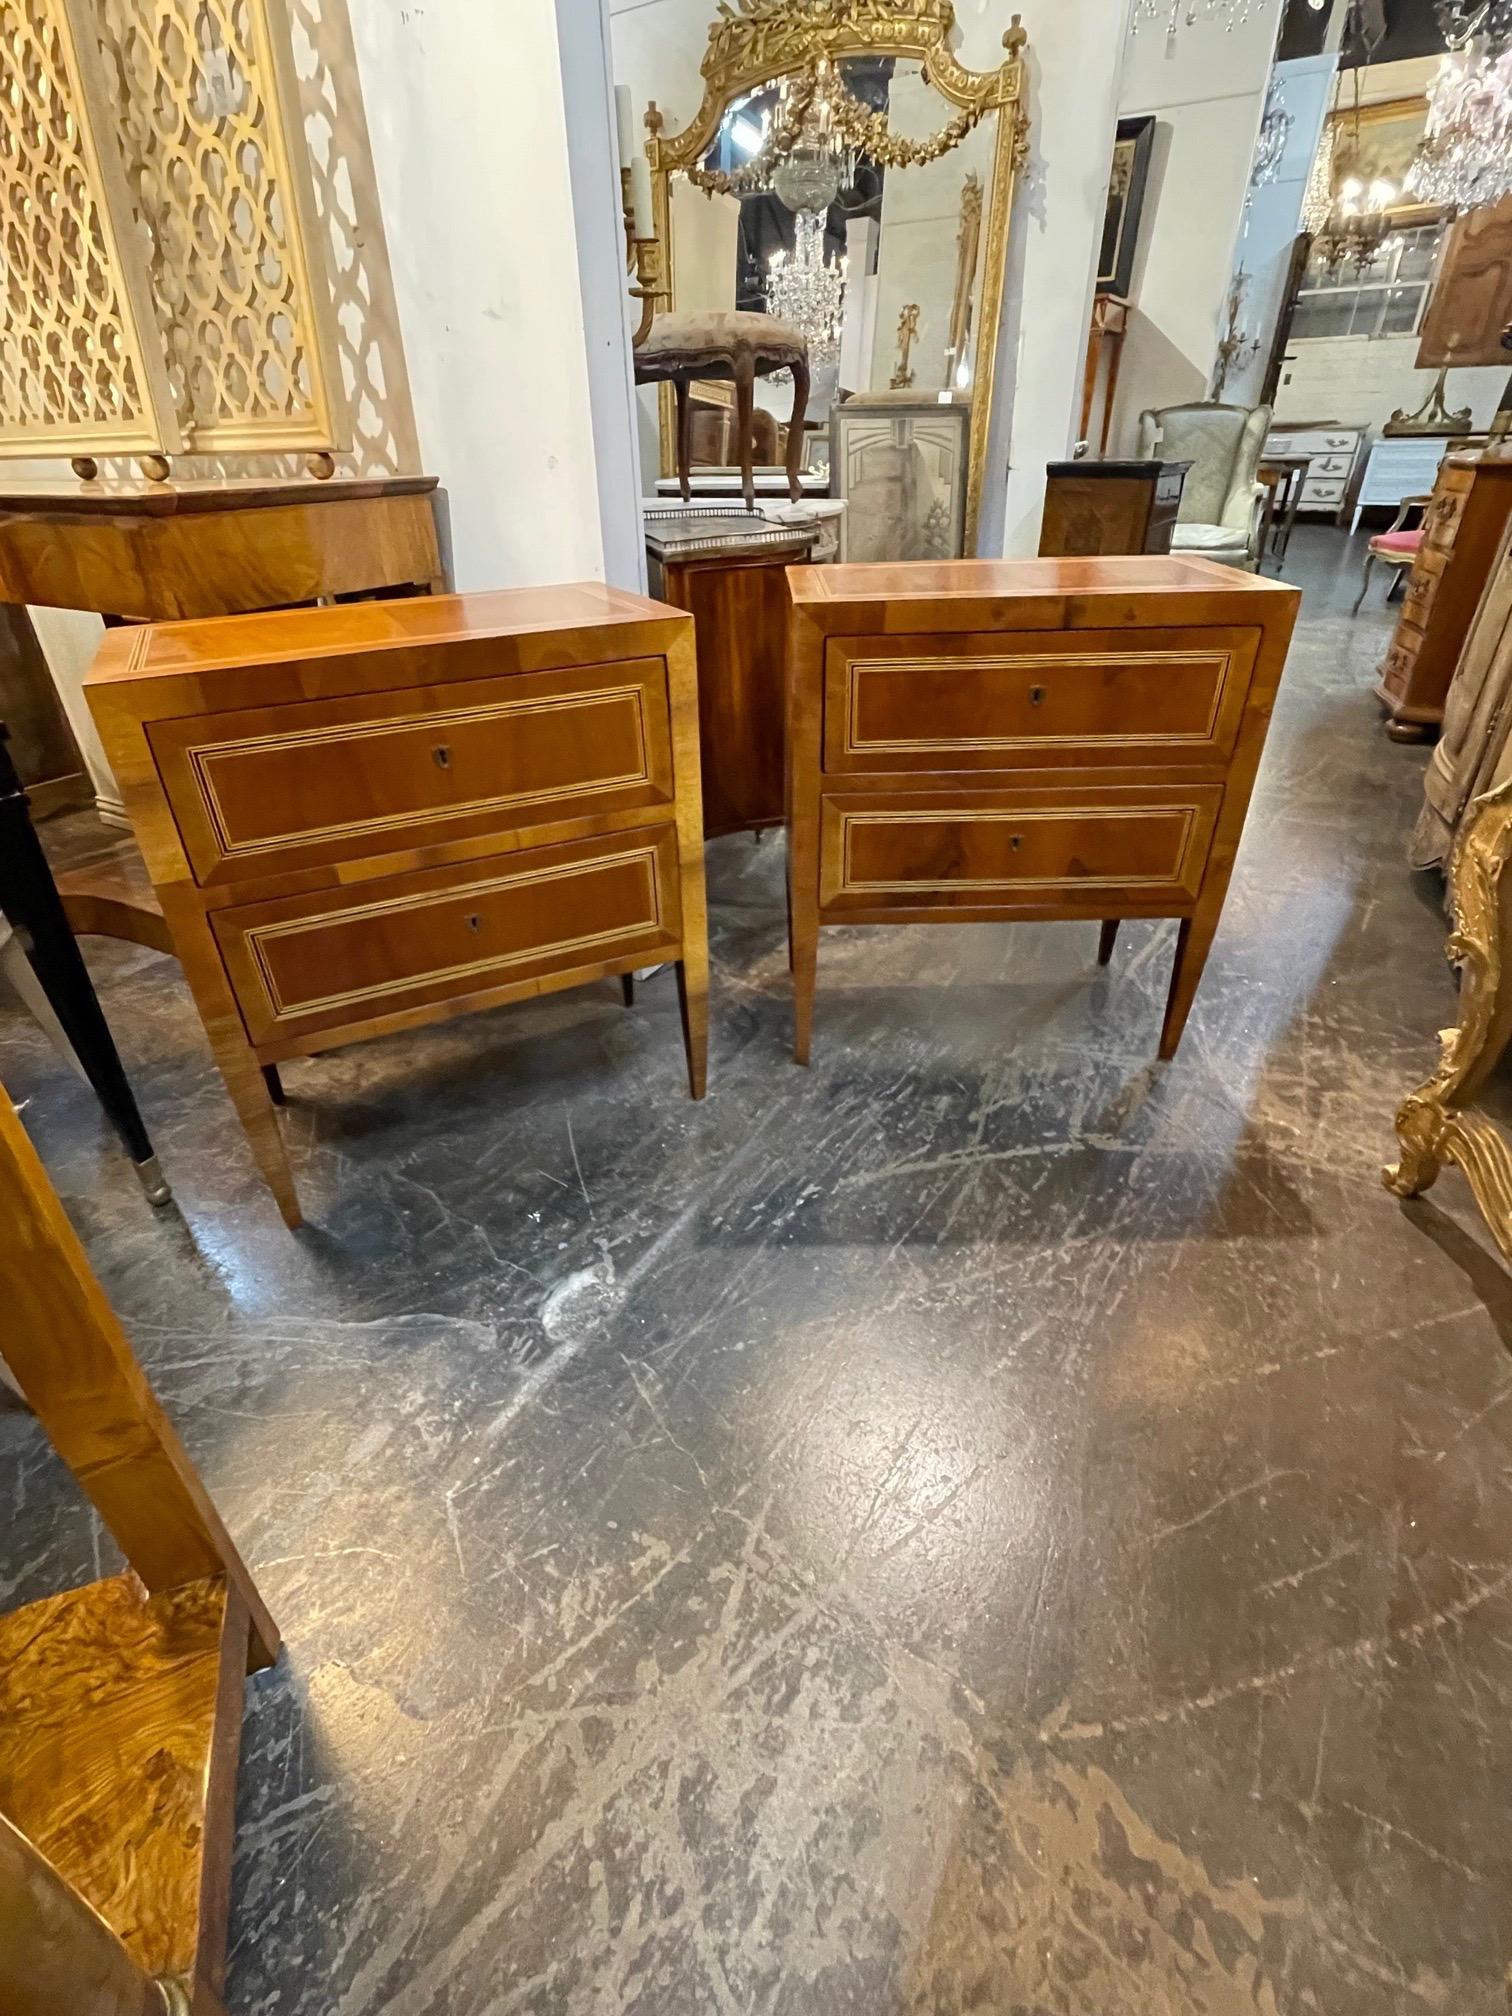 Lovely pair of Italian walnut Neo-Classical style bed side tables. These have a beautiful polished finish and a nice inlaid pattern as well. Very fine quality!